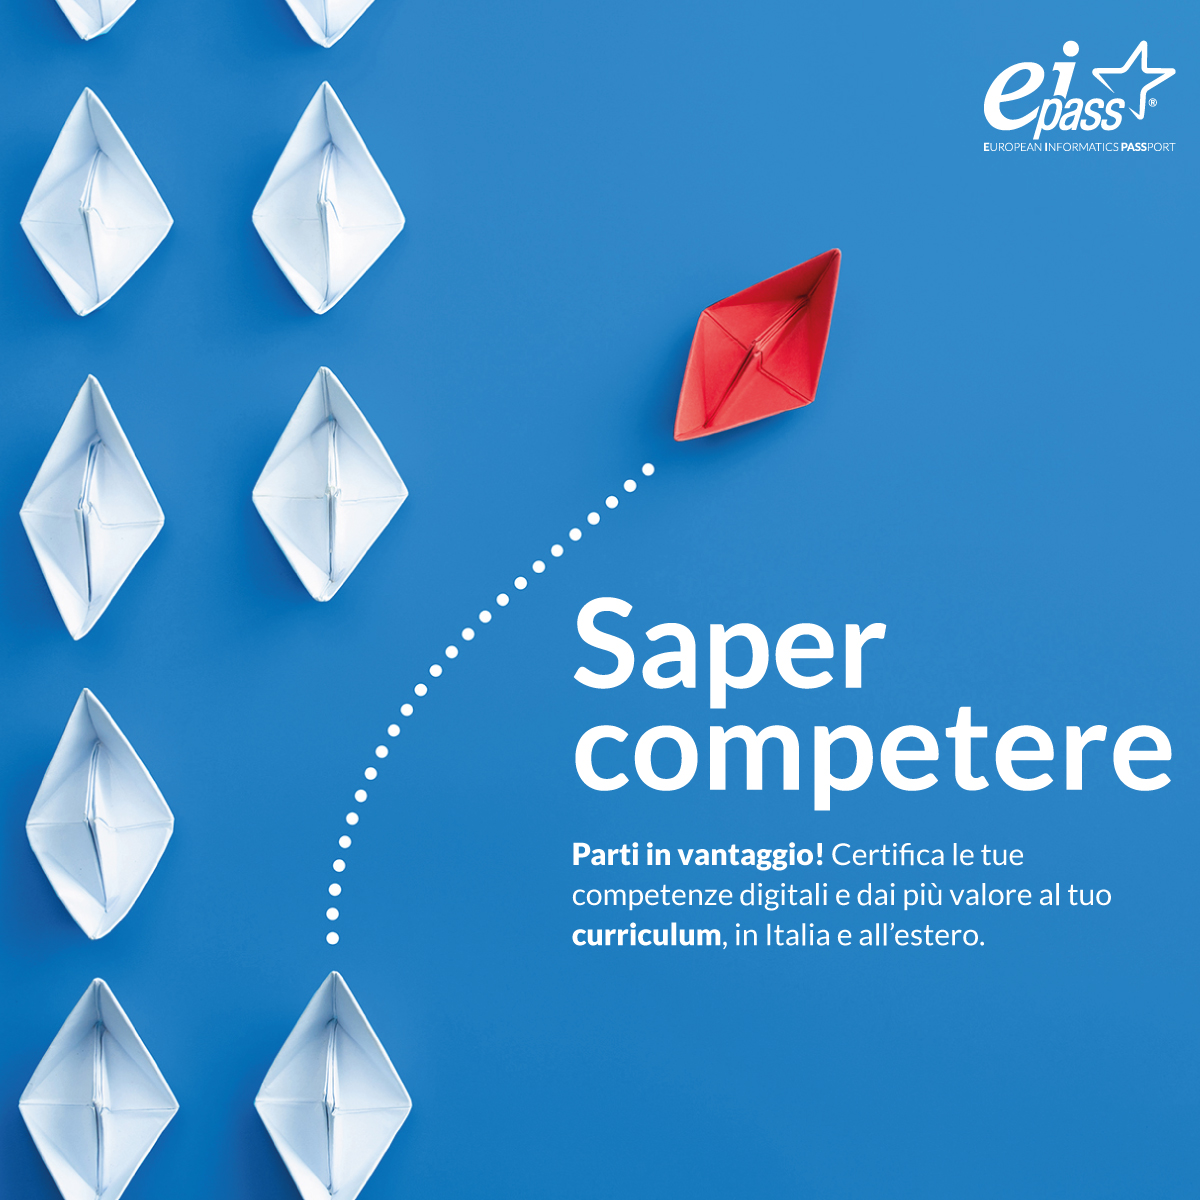 Eipass - Saper competere